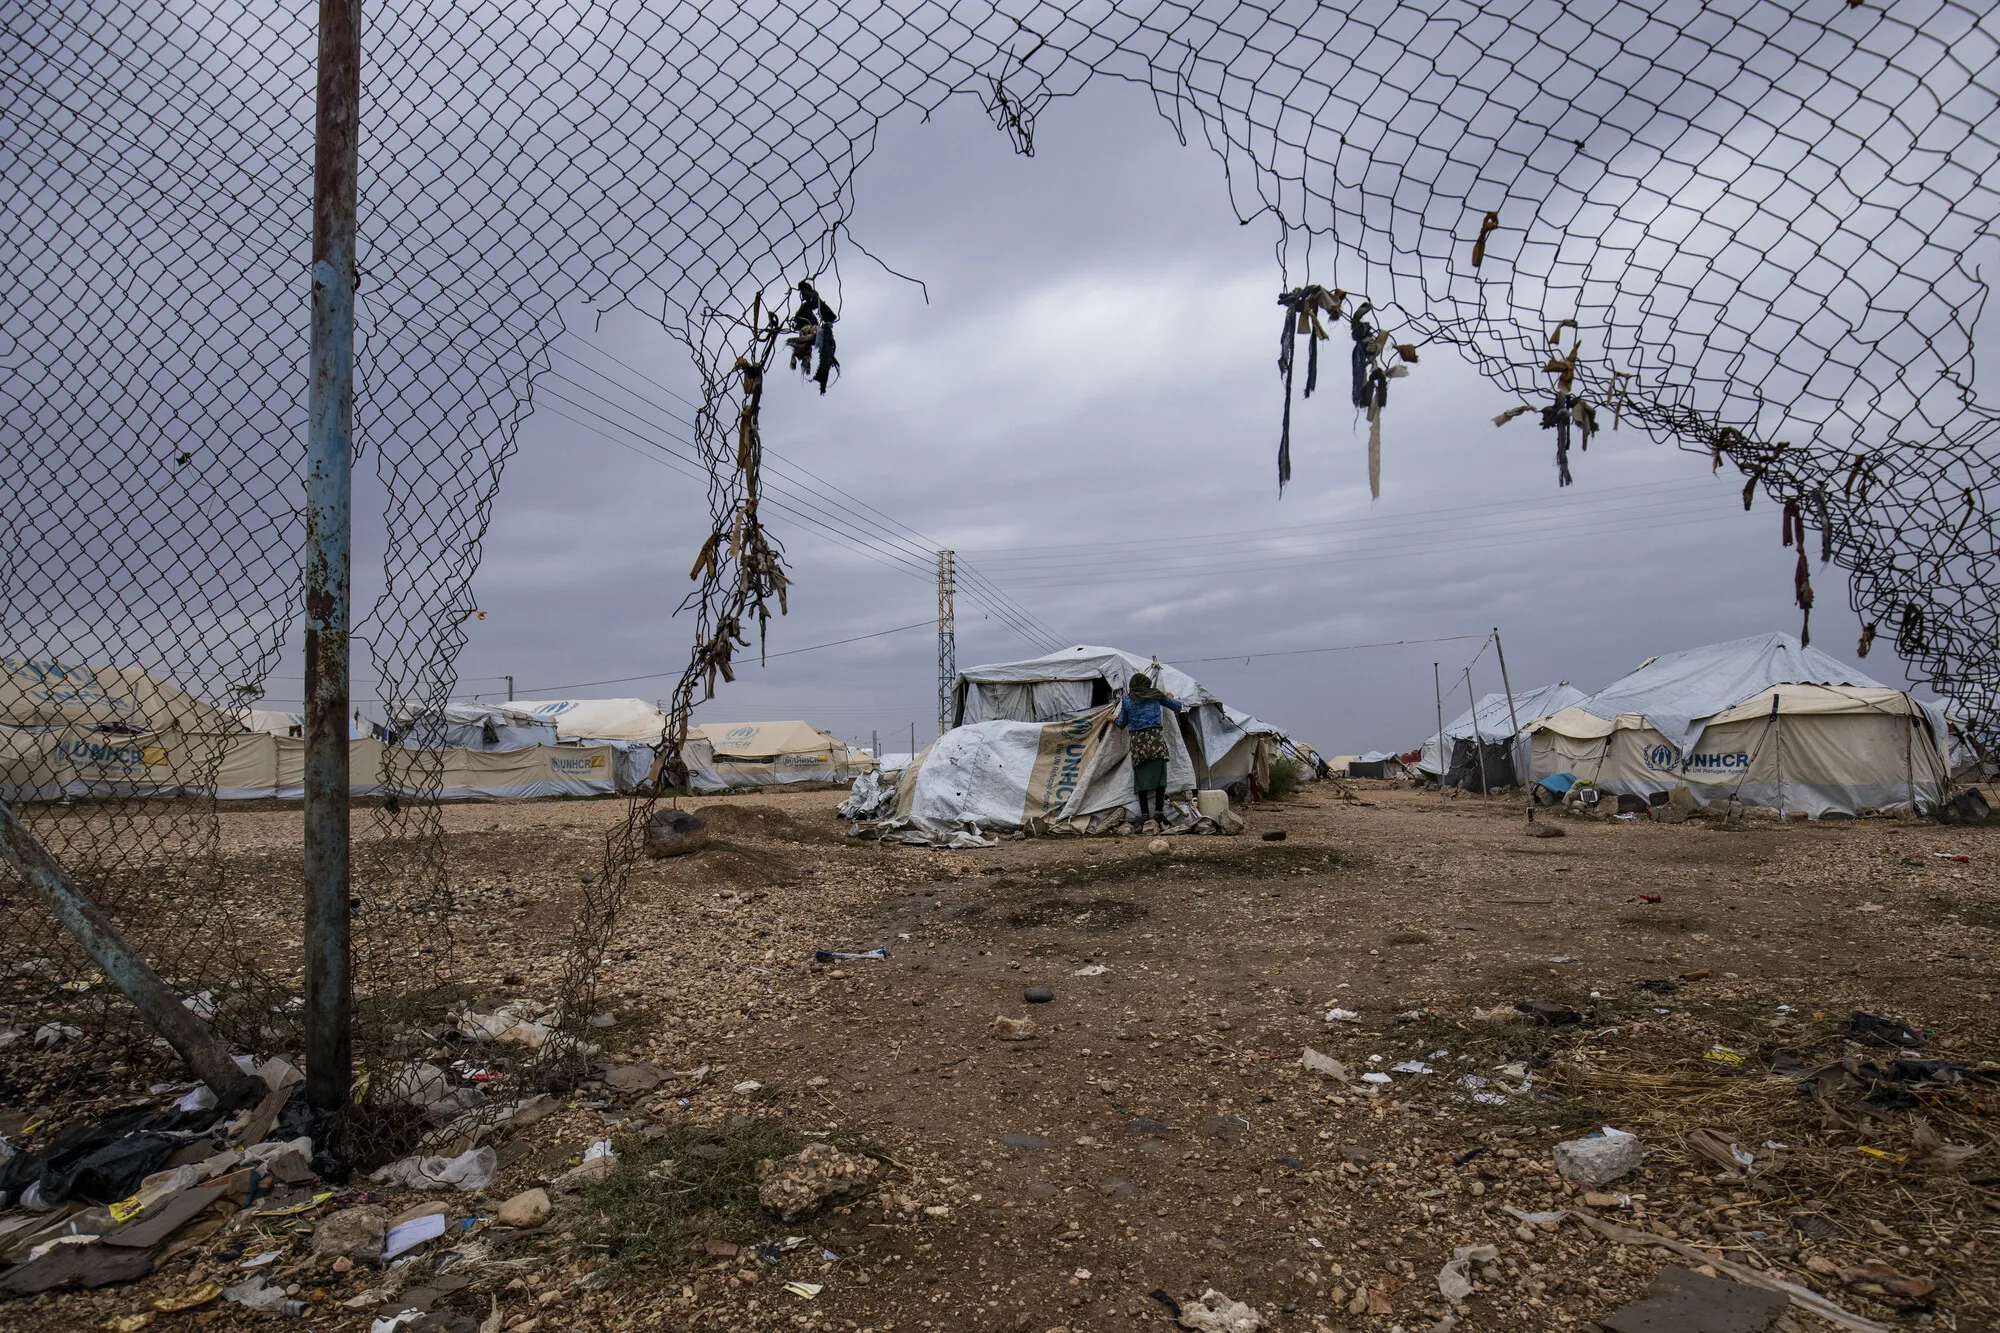 Picture shows a settlement camp with tents for the internally displaced people in Syria